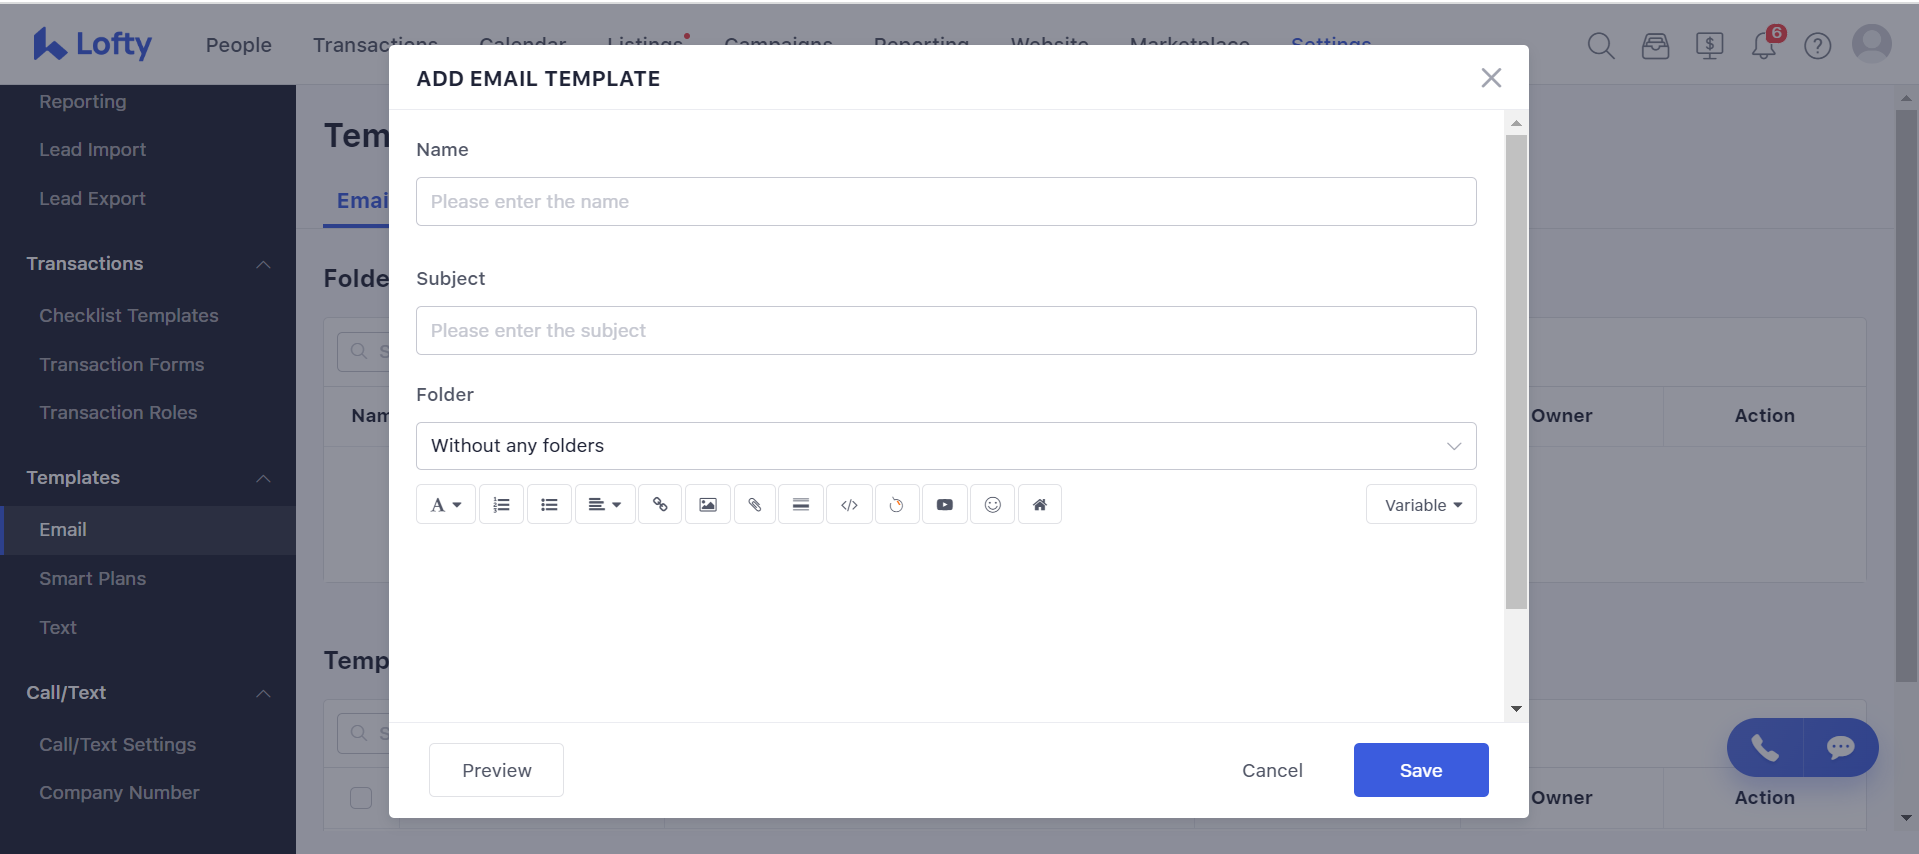 add new email template.png